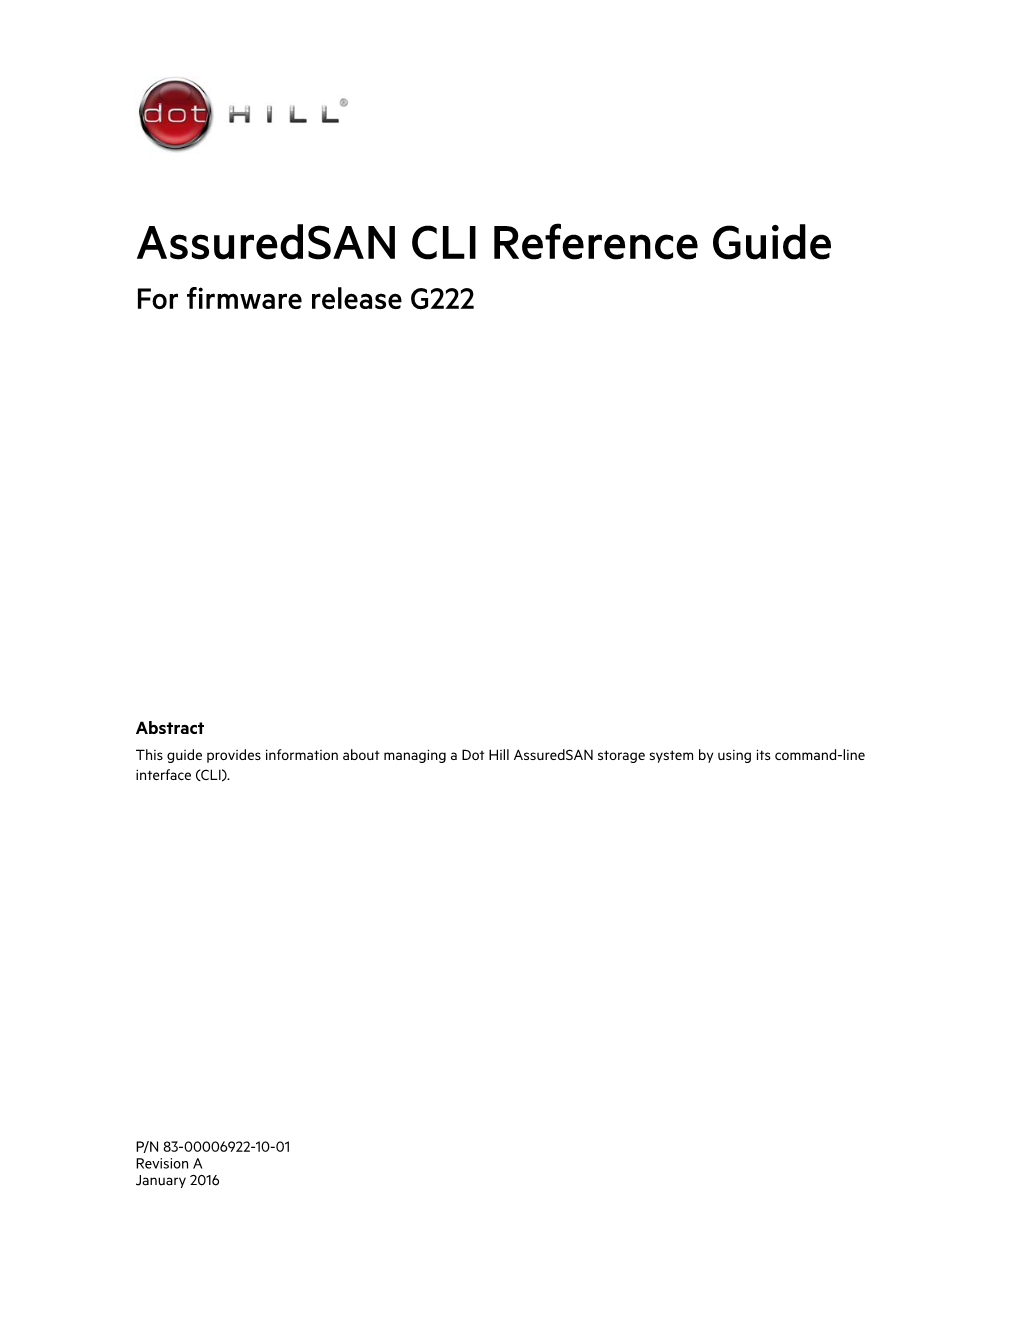 Assuredsan CLI Reference Guide for Firmware Release G222